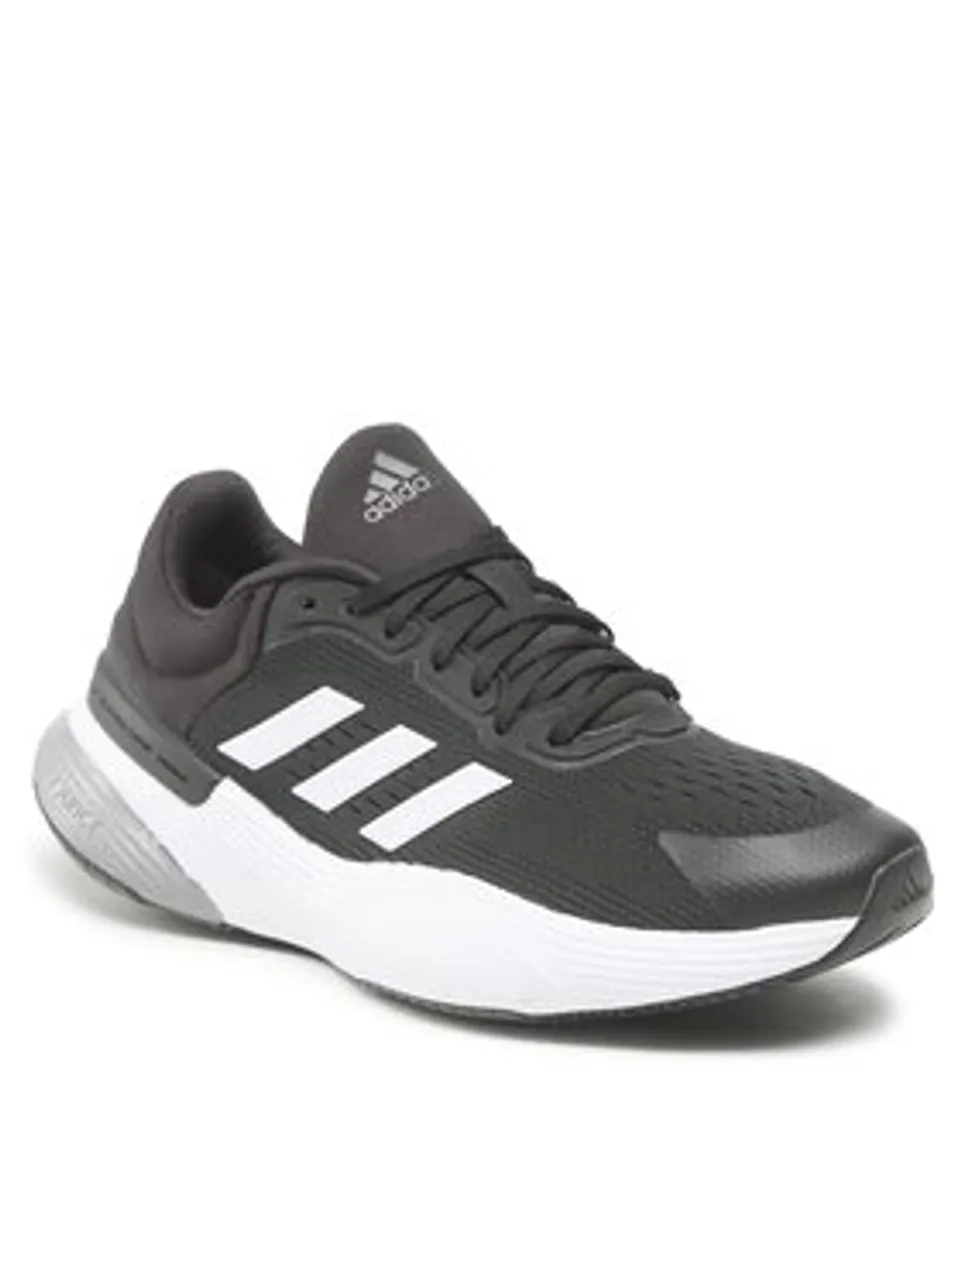 adidas Sneakers Response Super 3.0 Sport Running Lace Shoes HQ1331 Schwarz